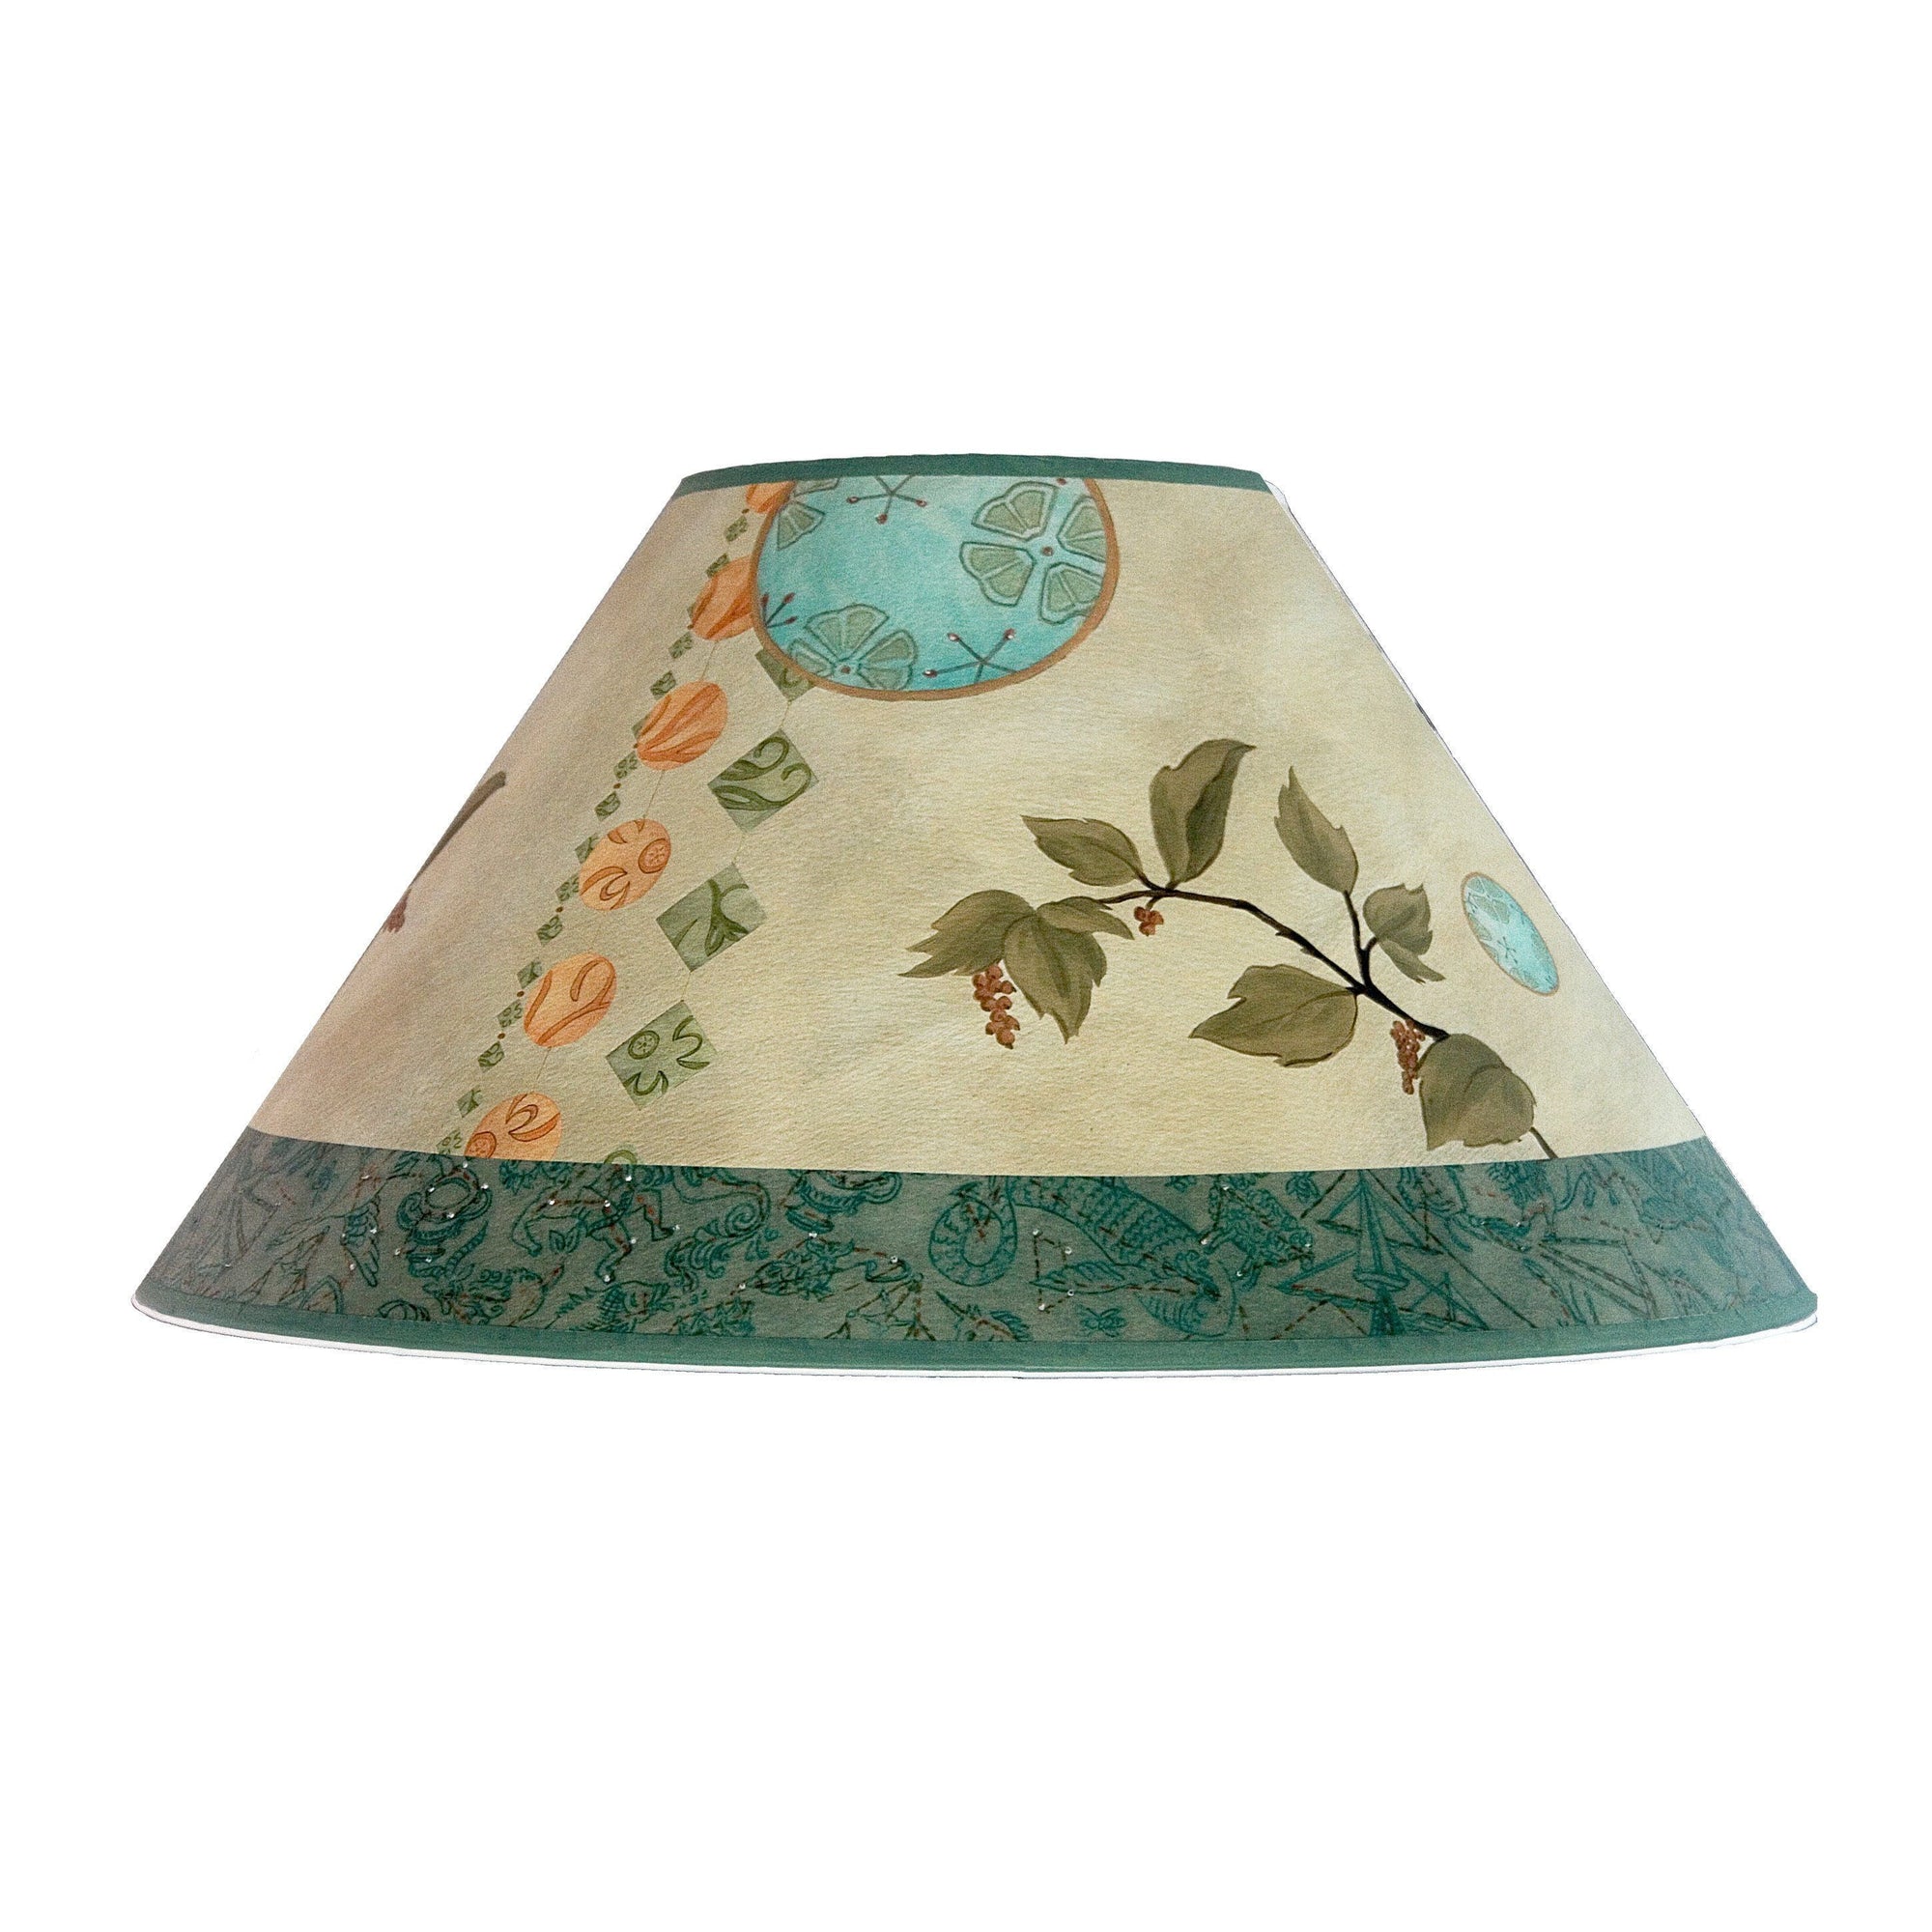 Janna Ugone & Co Lamp Shades Large Conical Lamp Shade in Celestial Leaf